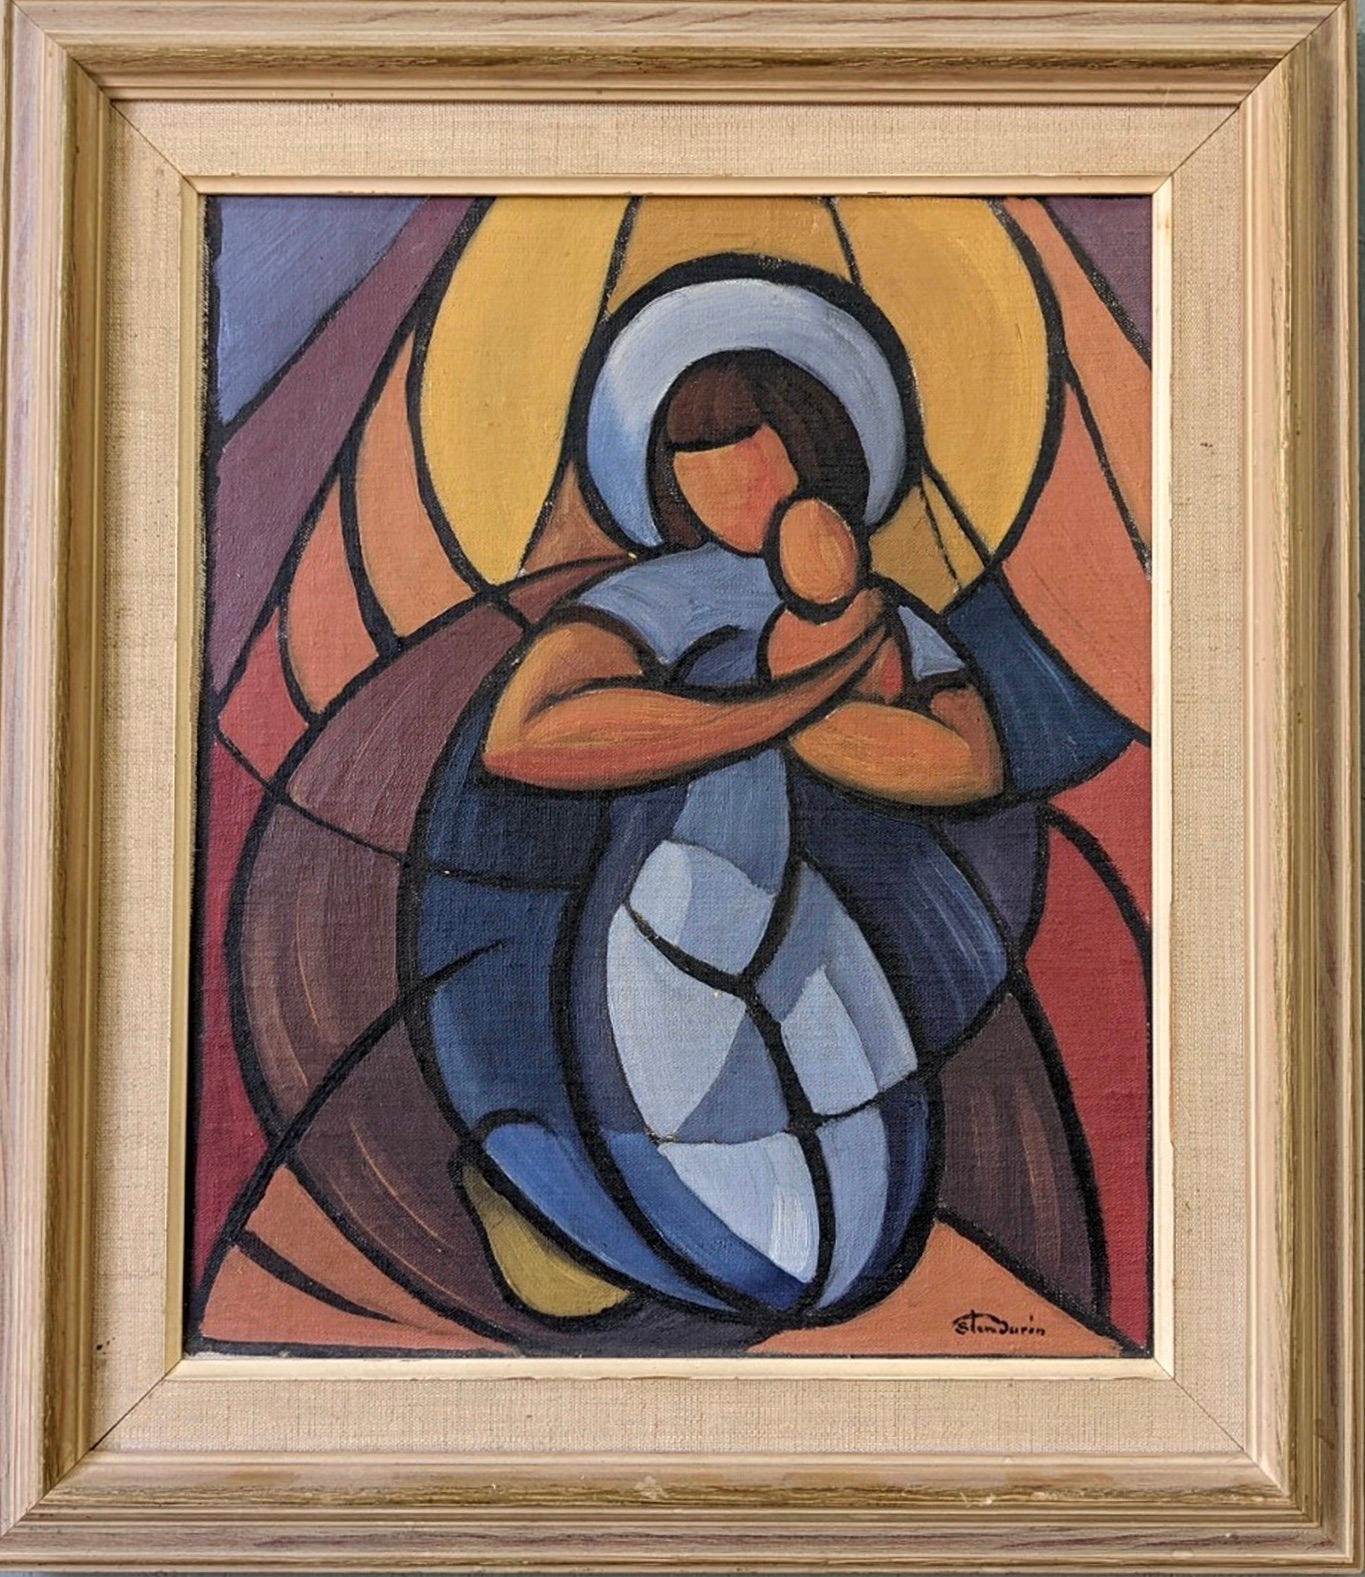 Unknown Figurative Painting - Vintage Mid-Century Framed Cubist Abstract Oil Painting - Madonna & Child